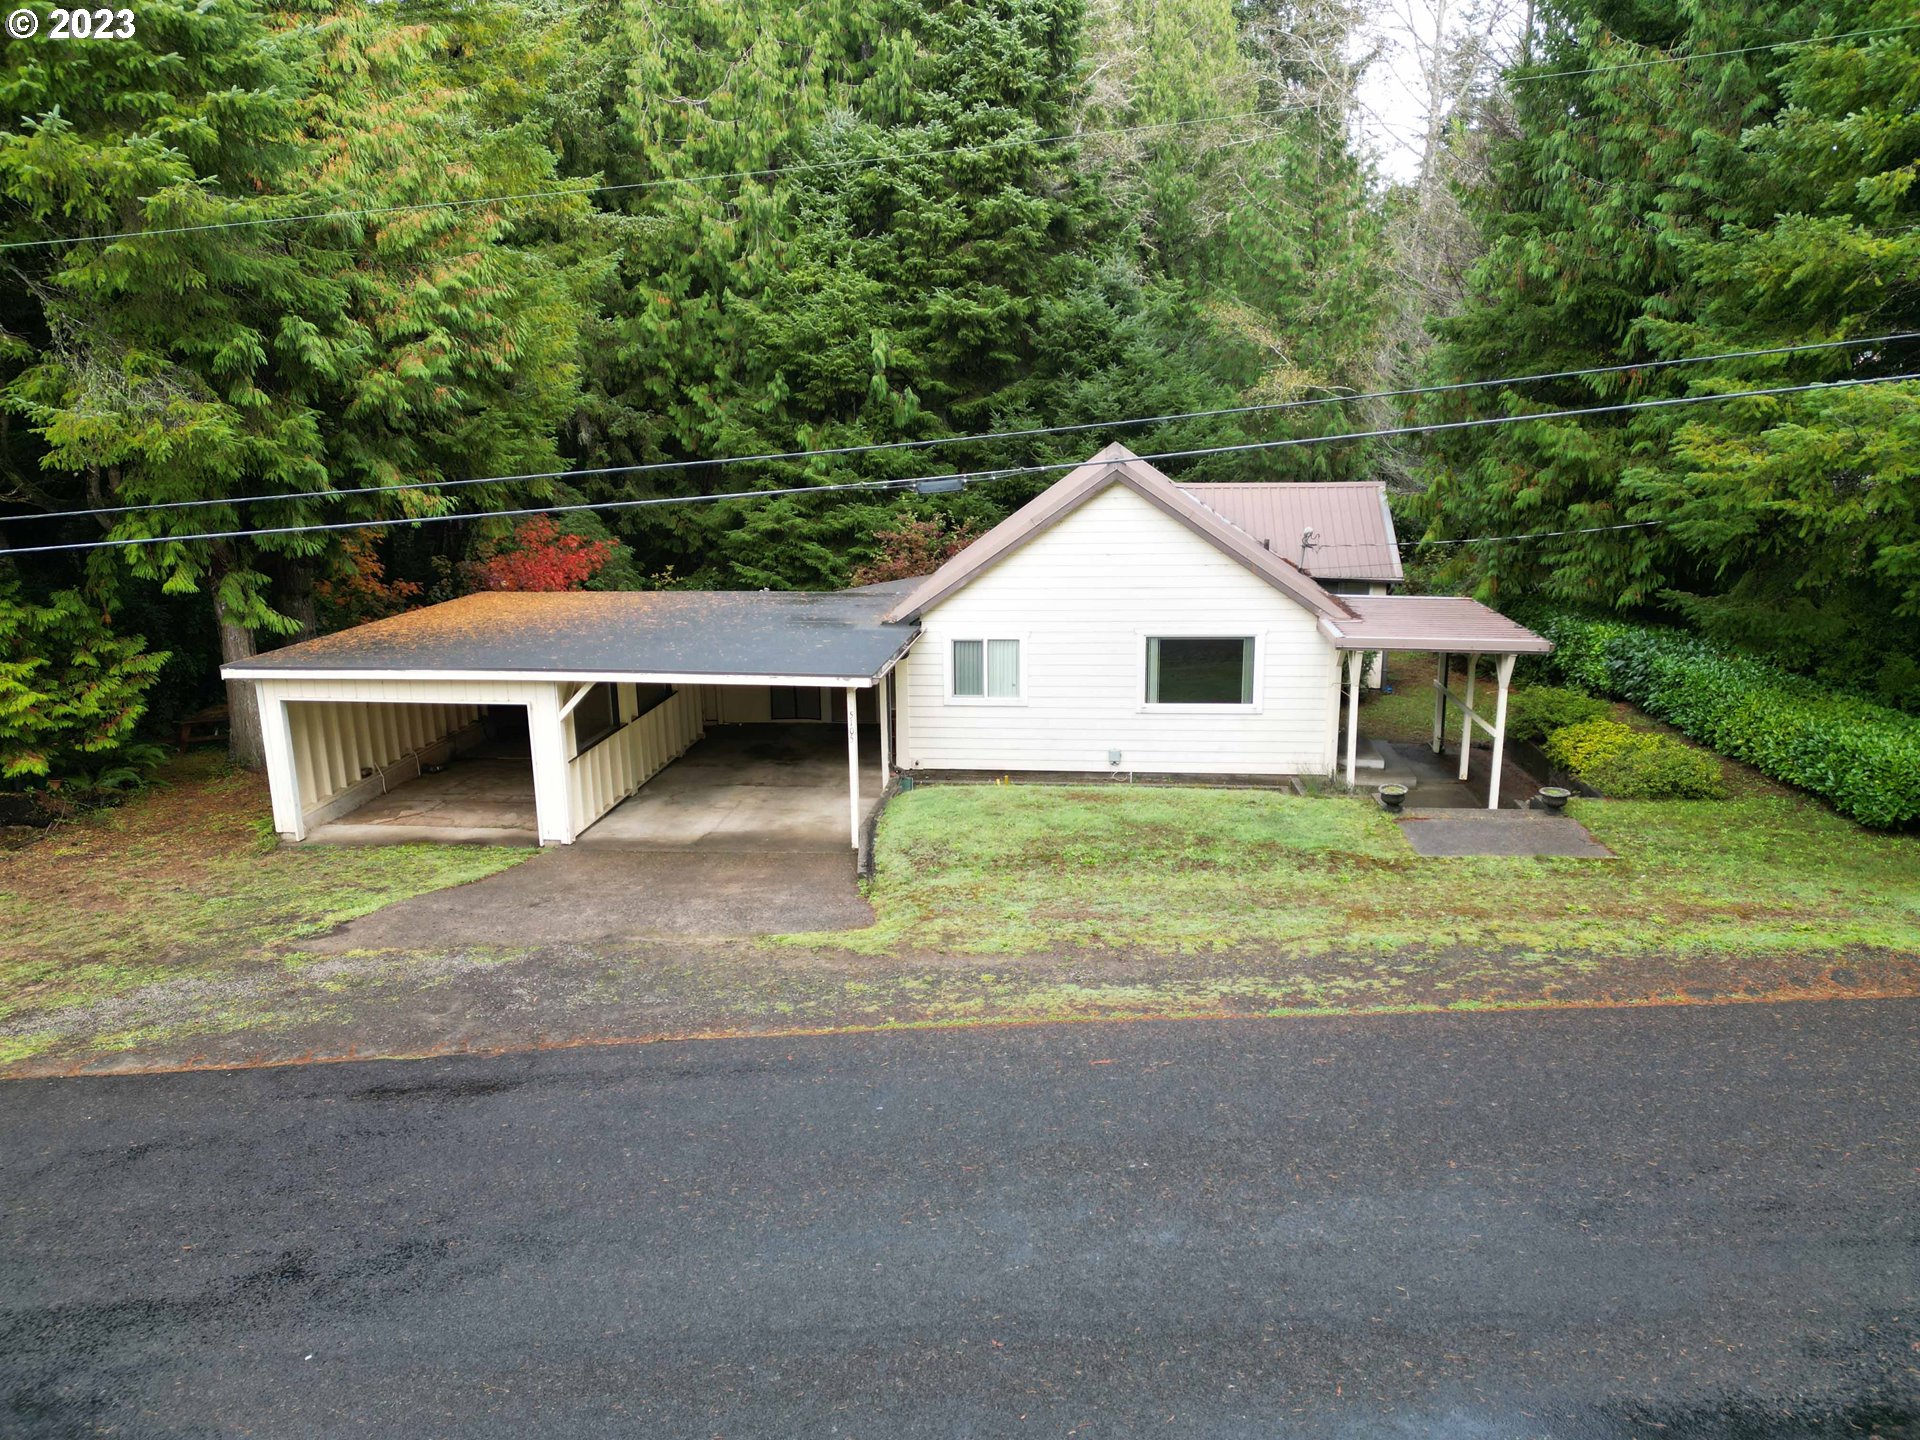 Lots of potential with this 2 bedroom, 1 bathroom home on 1.16 acres. Located just South of Florence only minutes from sand dunes, camping, fishing, etc. Living room features newer mini split heat pump. Laundry/storage room off of kitchen and leading to carport. Plenty of parking space in driveway & attached 2-car carport. Septic tank will need to be replaced.